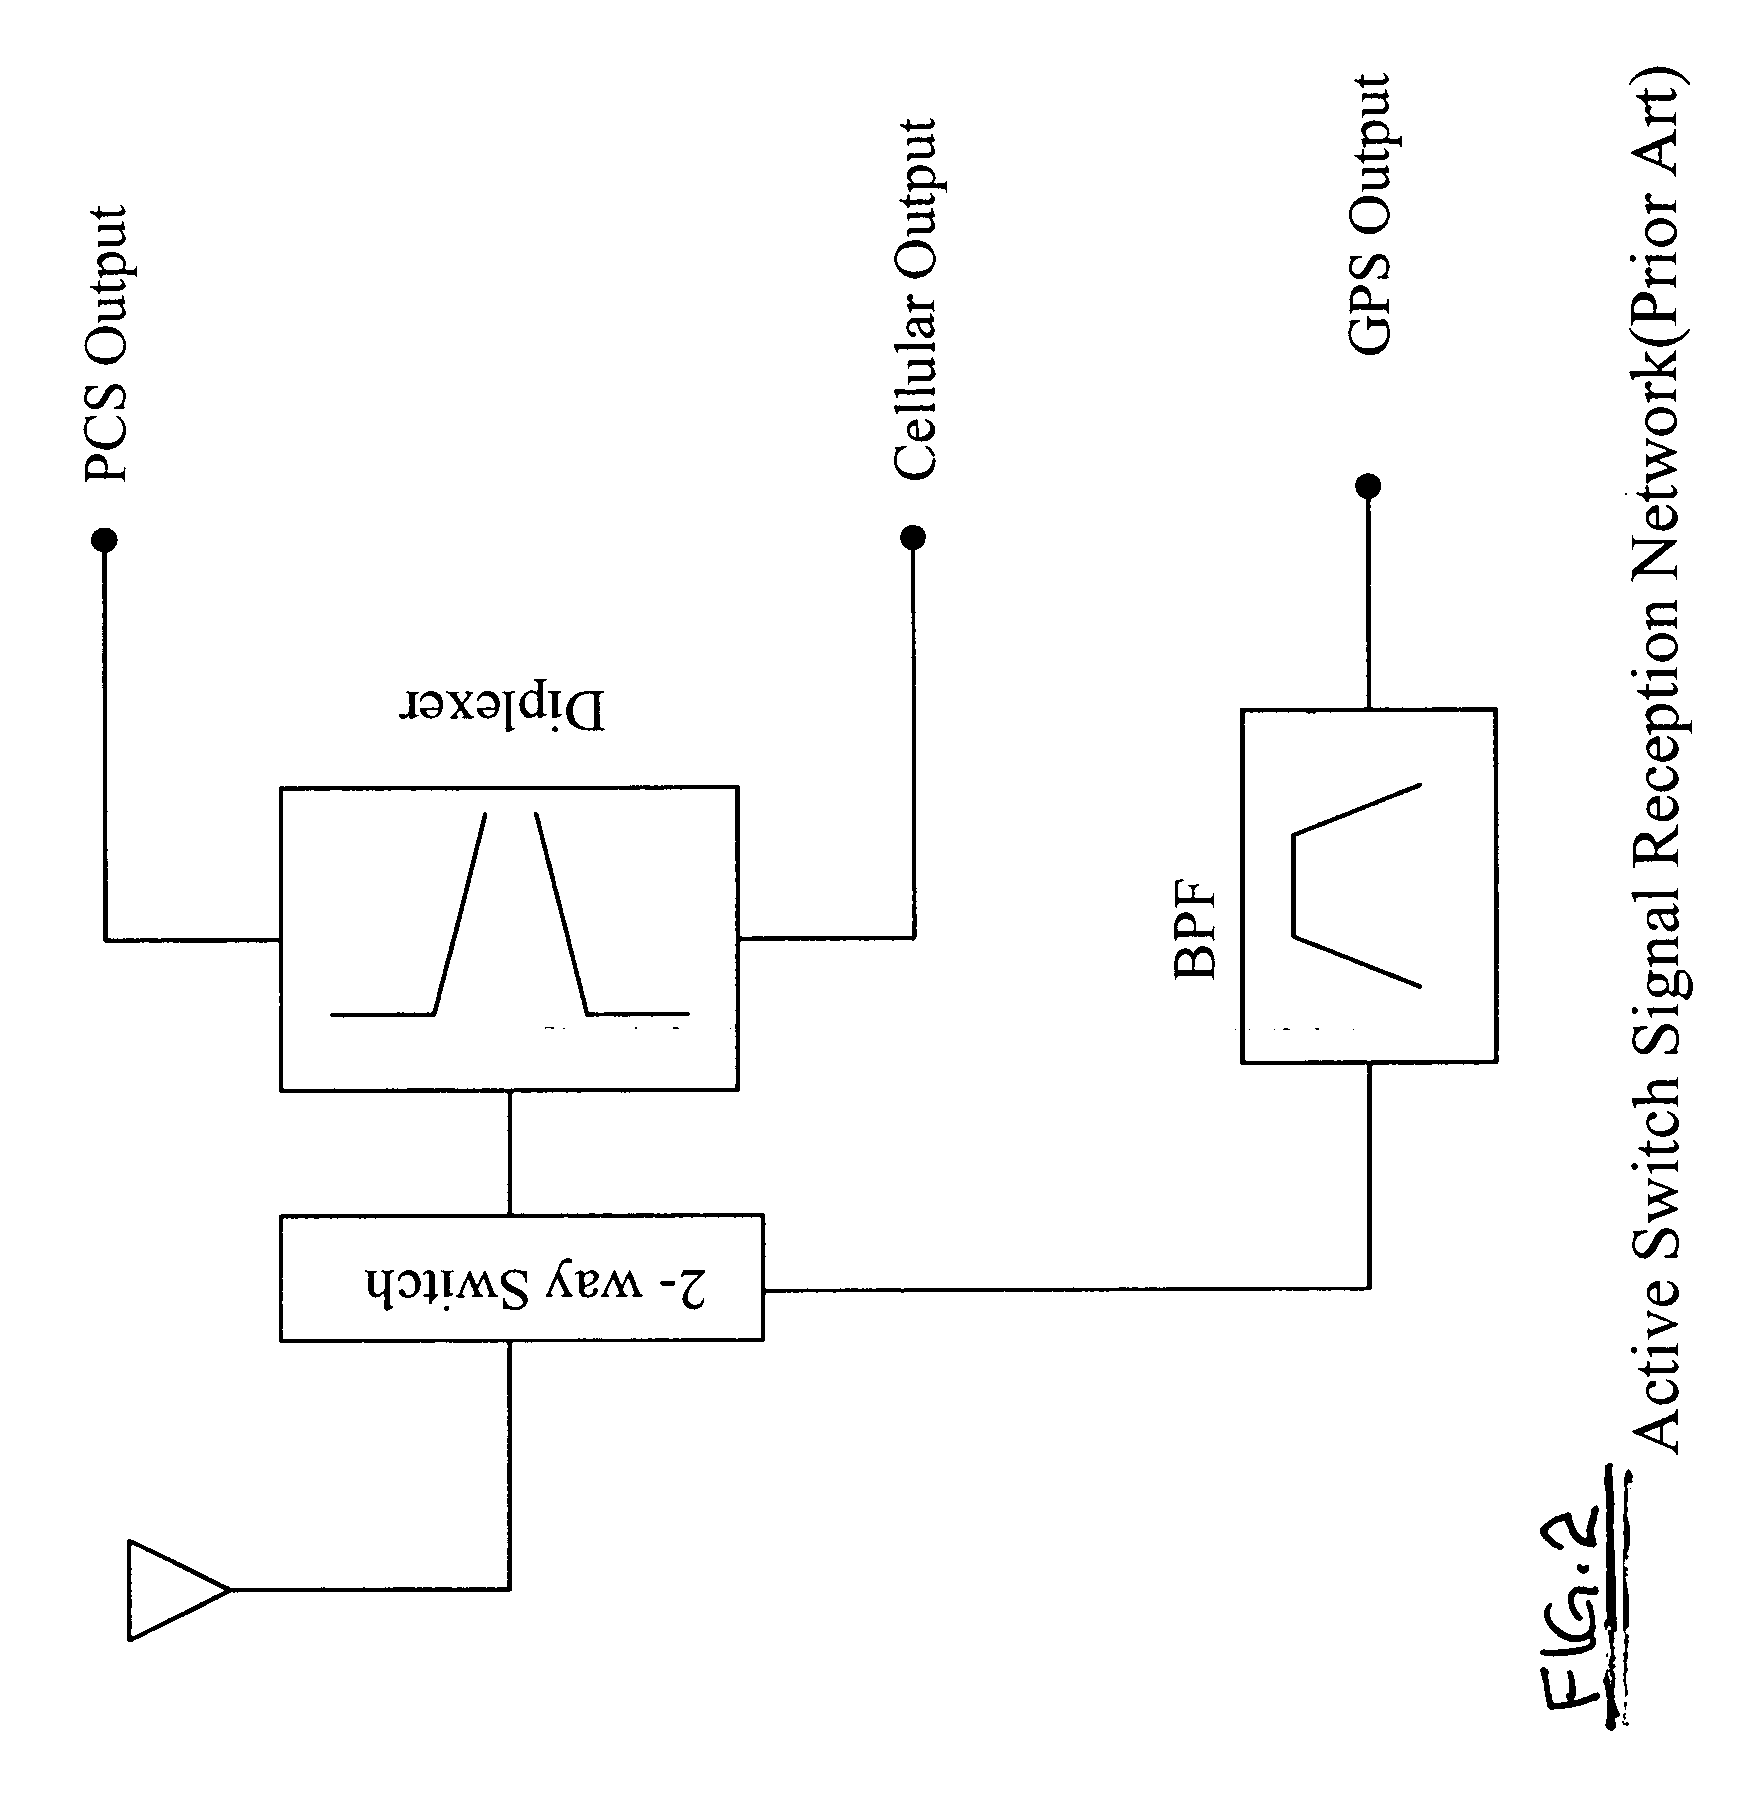 Triband passive signal receptor network